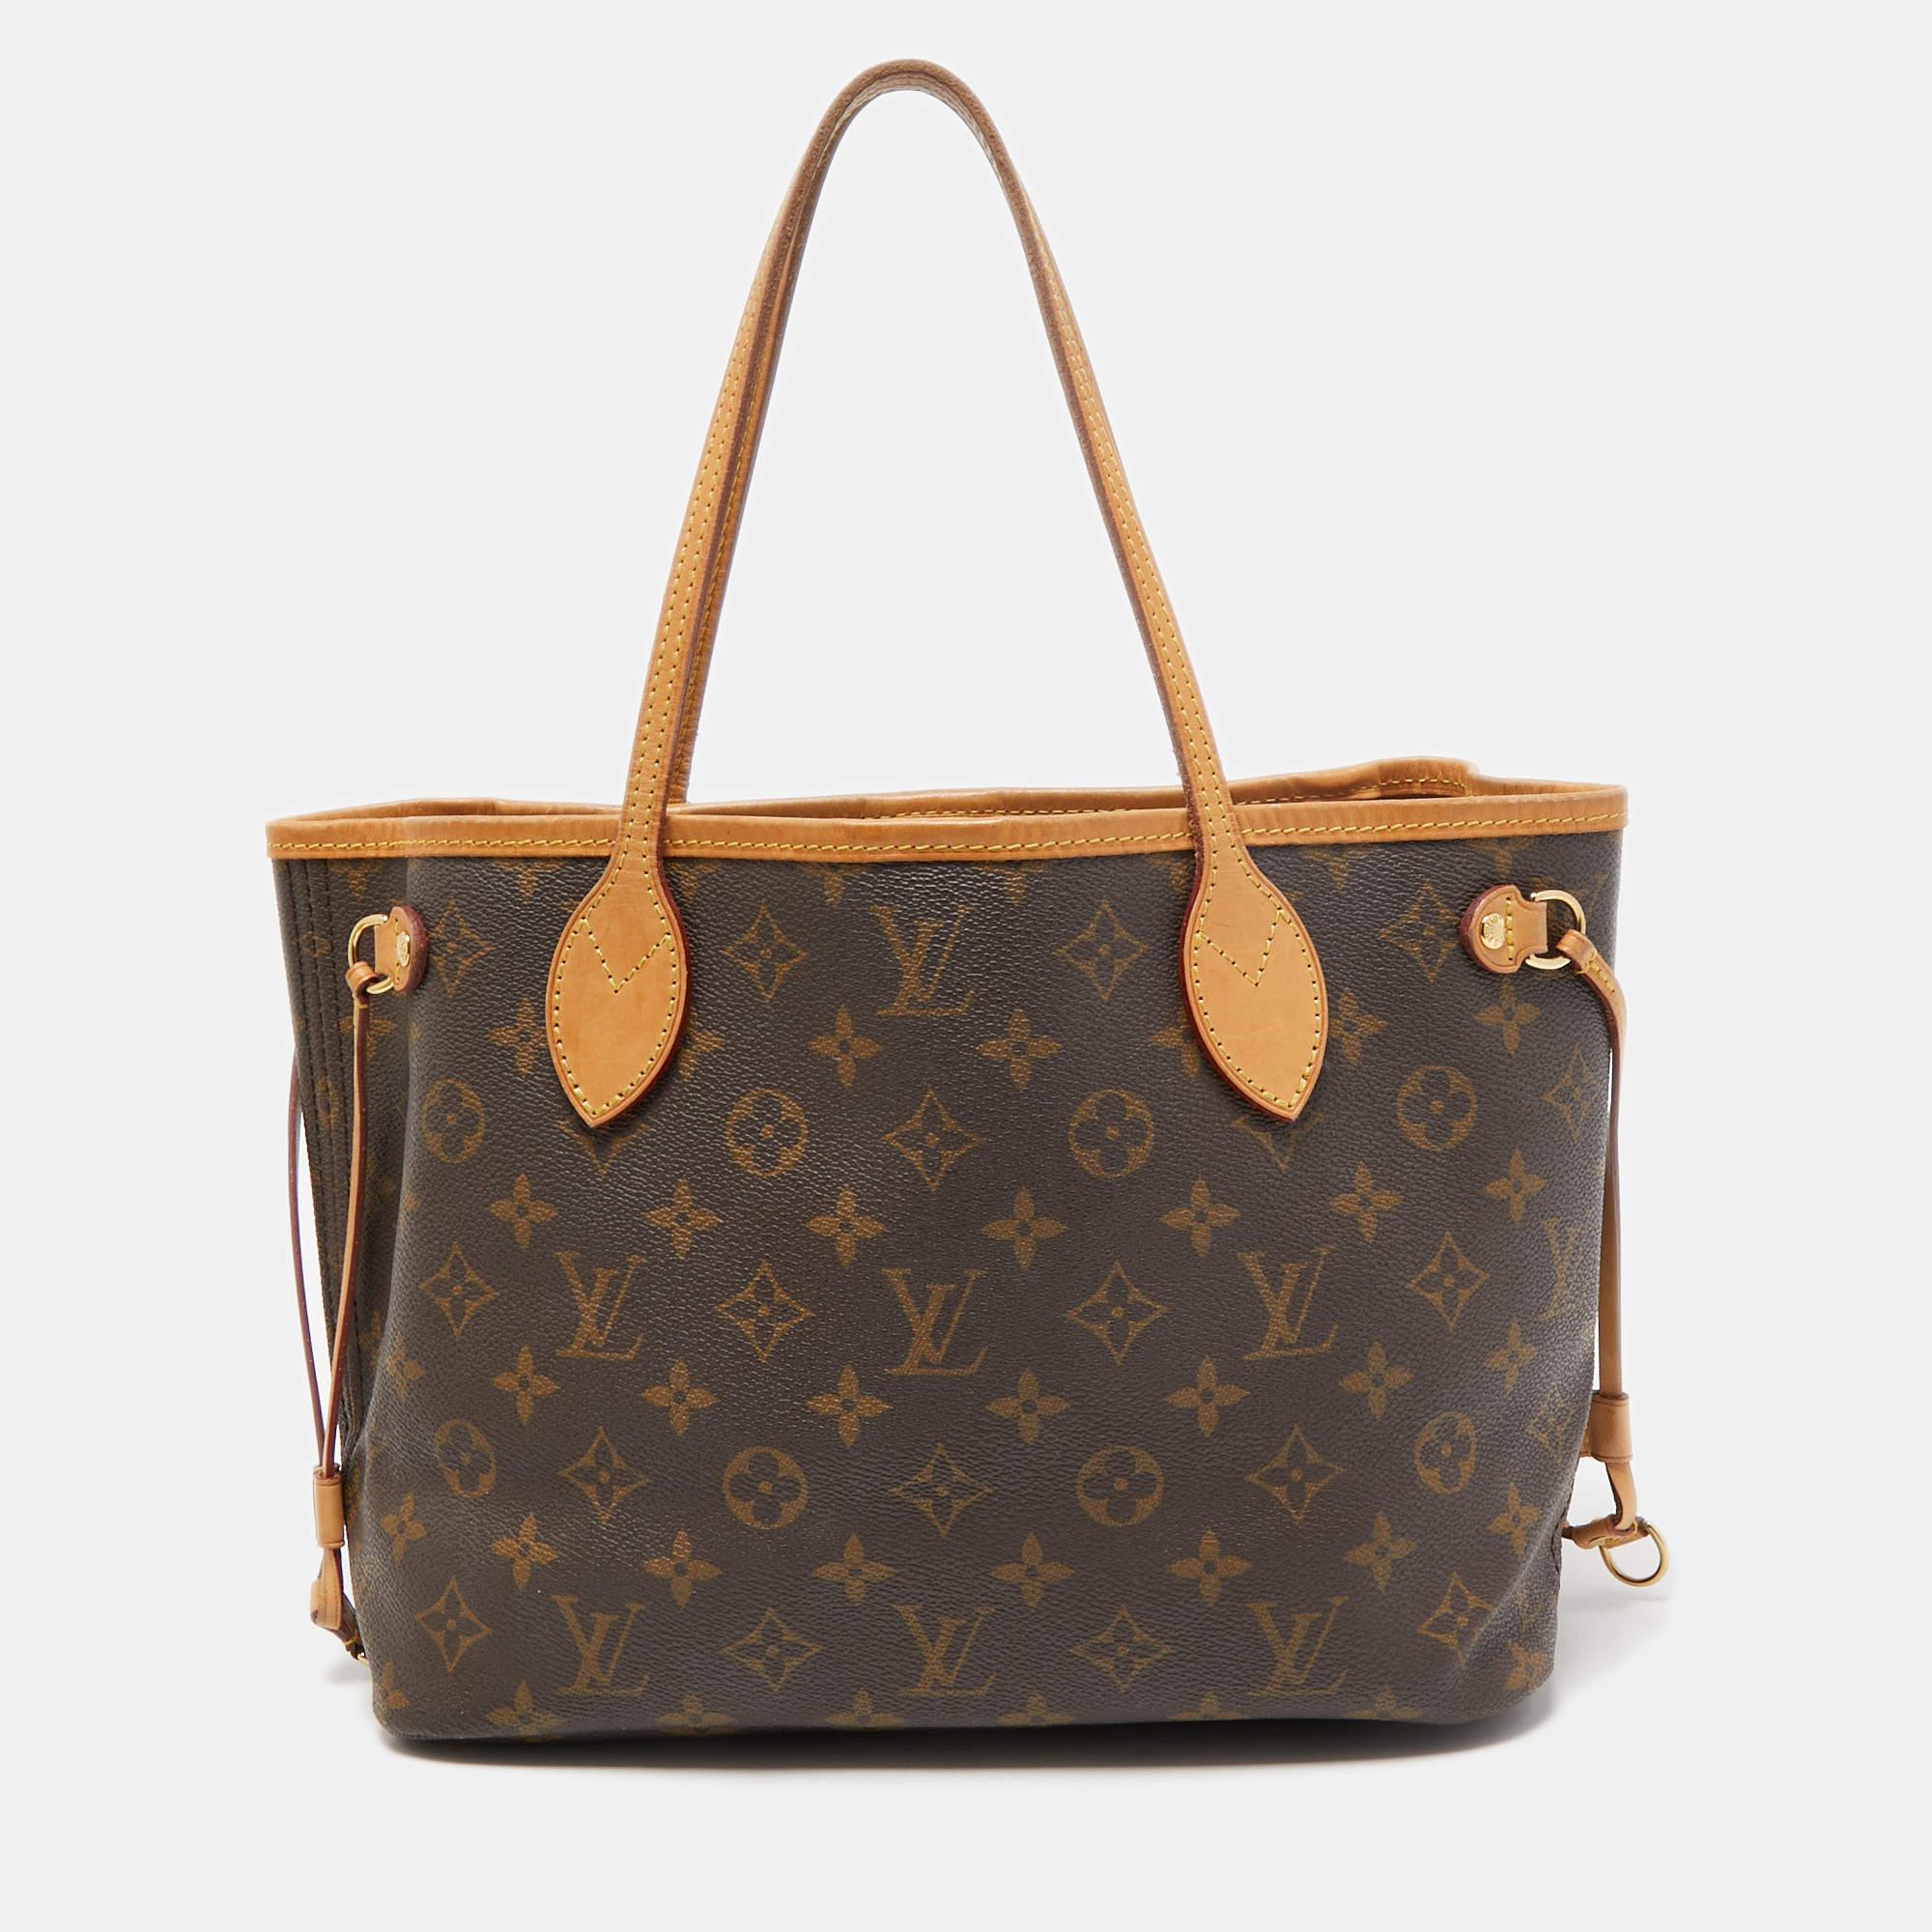 The Neverfull PM features a Monogram canvas body, leather handles, drawstring sides, and an interior zip pocket. it is a classic tote bag beloved by fashionistas.

